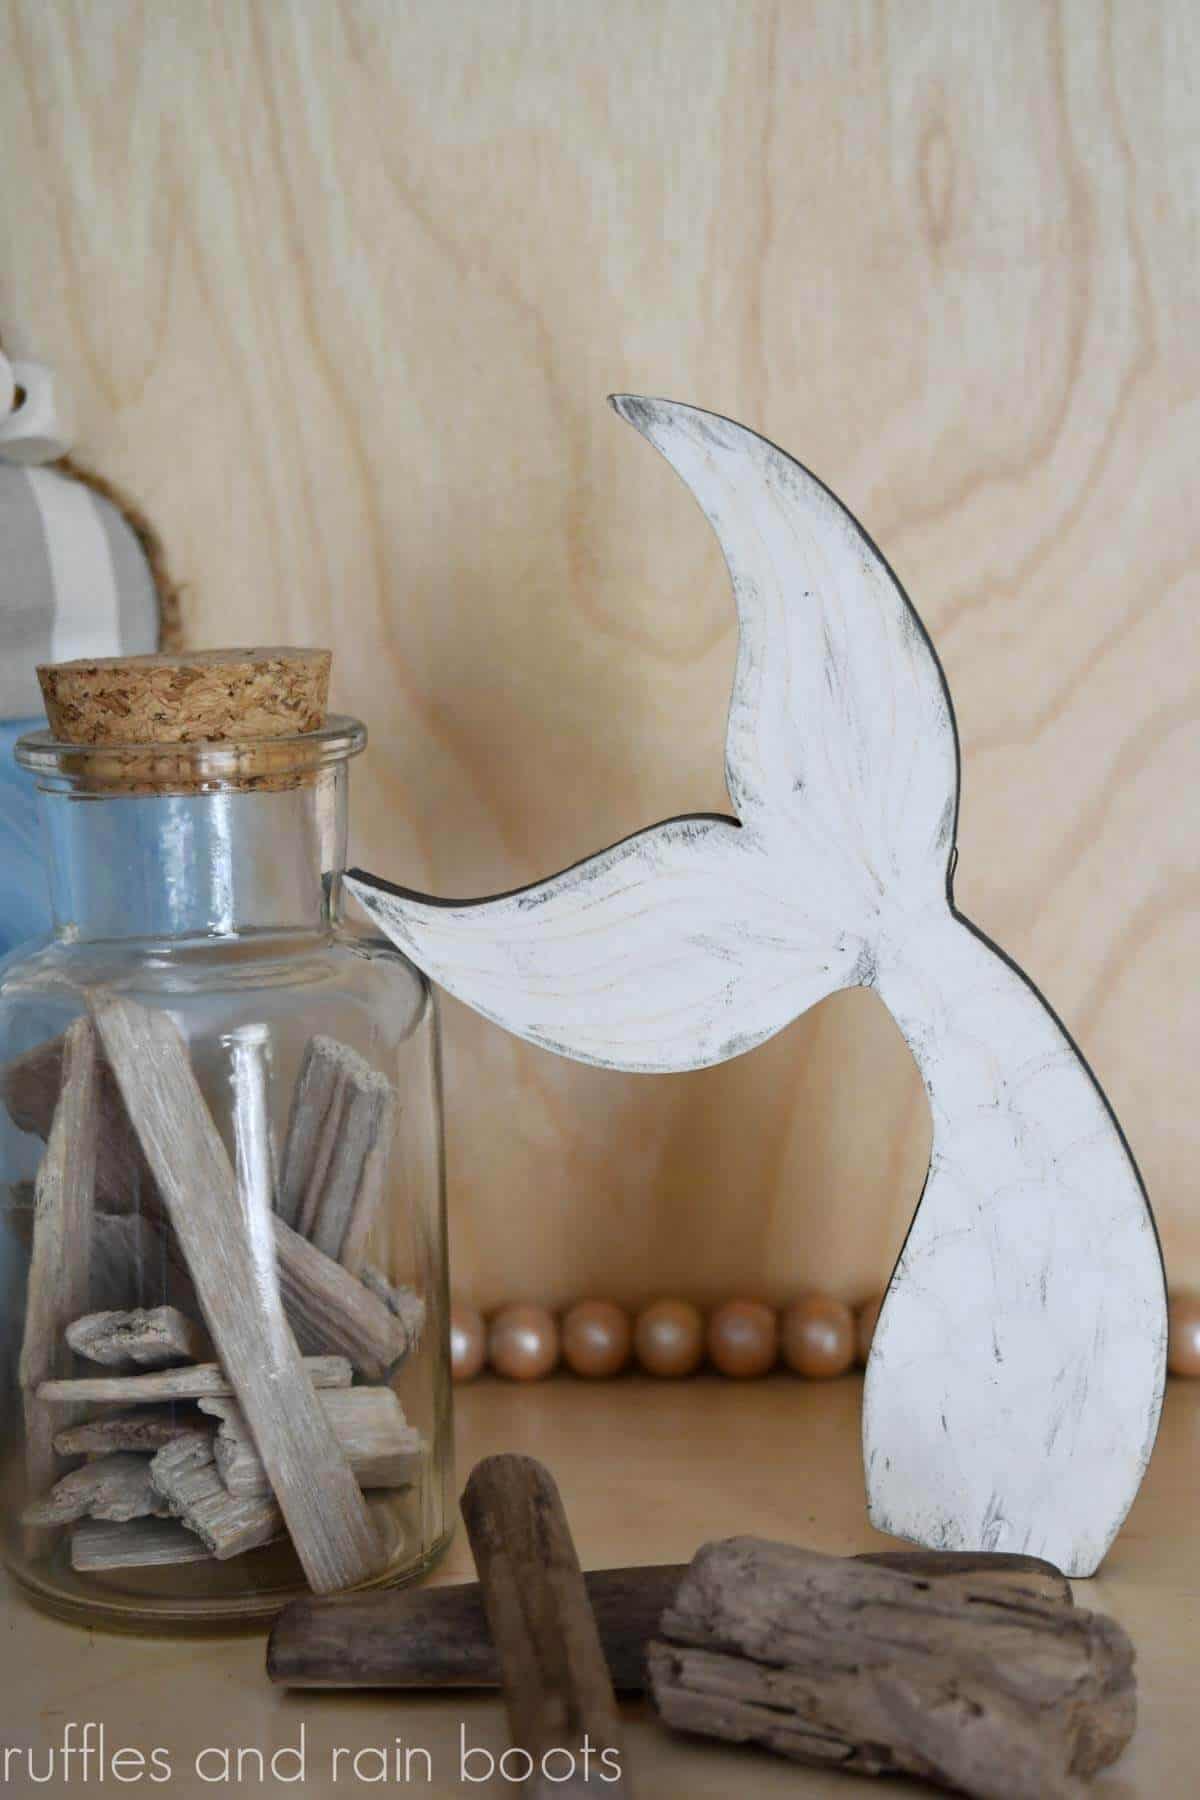 Vertical image of a mermaid tail shelf sitter on a light wood background with driftwood pieces scattered and in a glass jar with cork top.